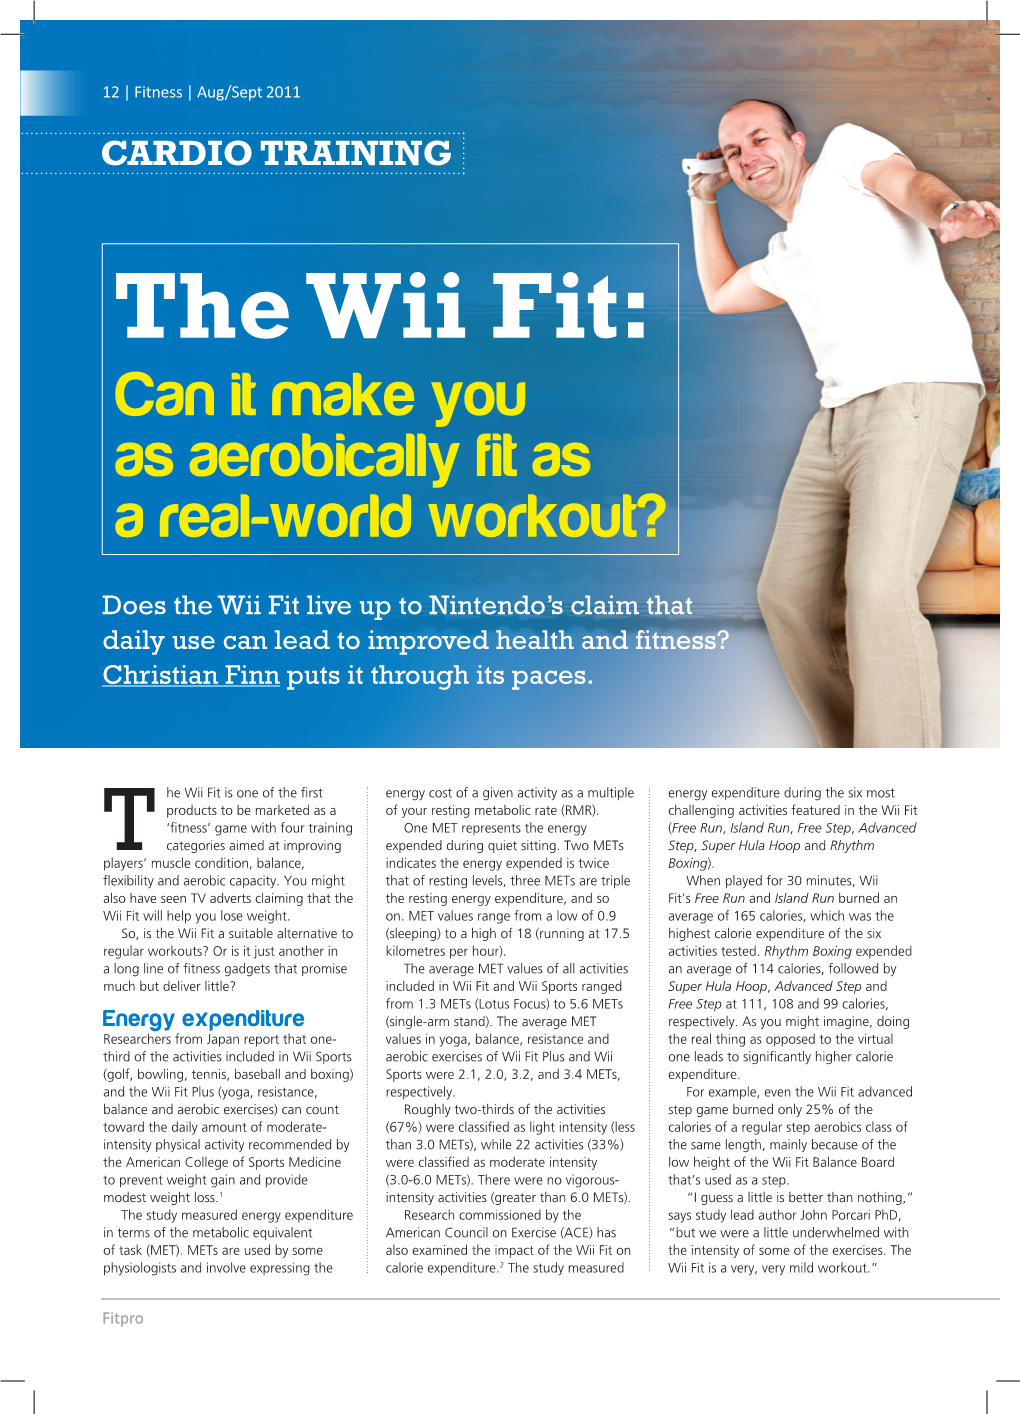 The Wii Fit: Can It Make You As Aerobically Fit As a Real-World Workout?